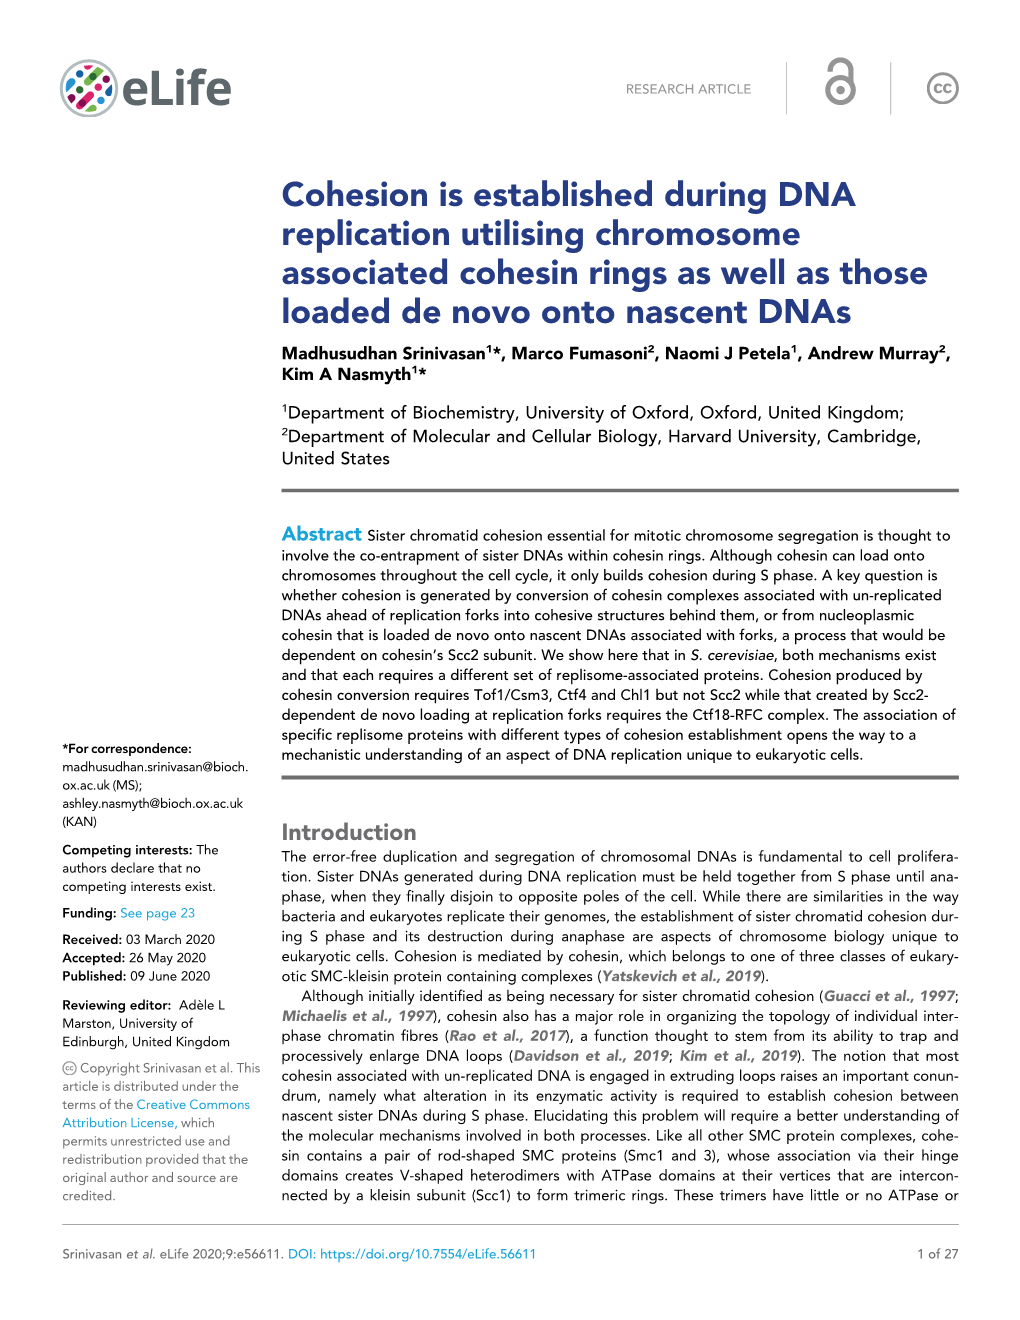 Cohesion Is Established During DNA Replication Utilising Chromosome